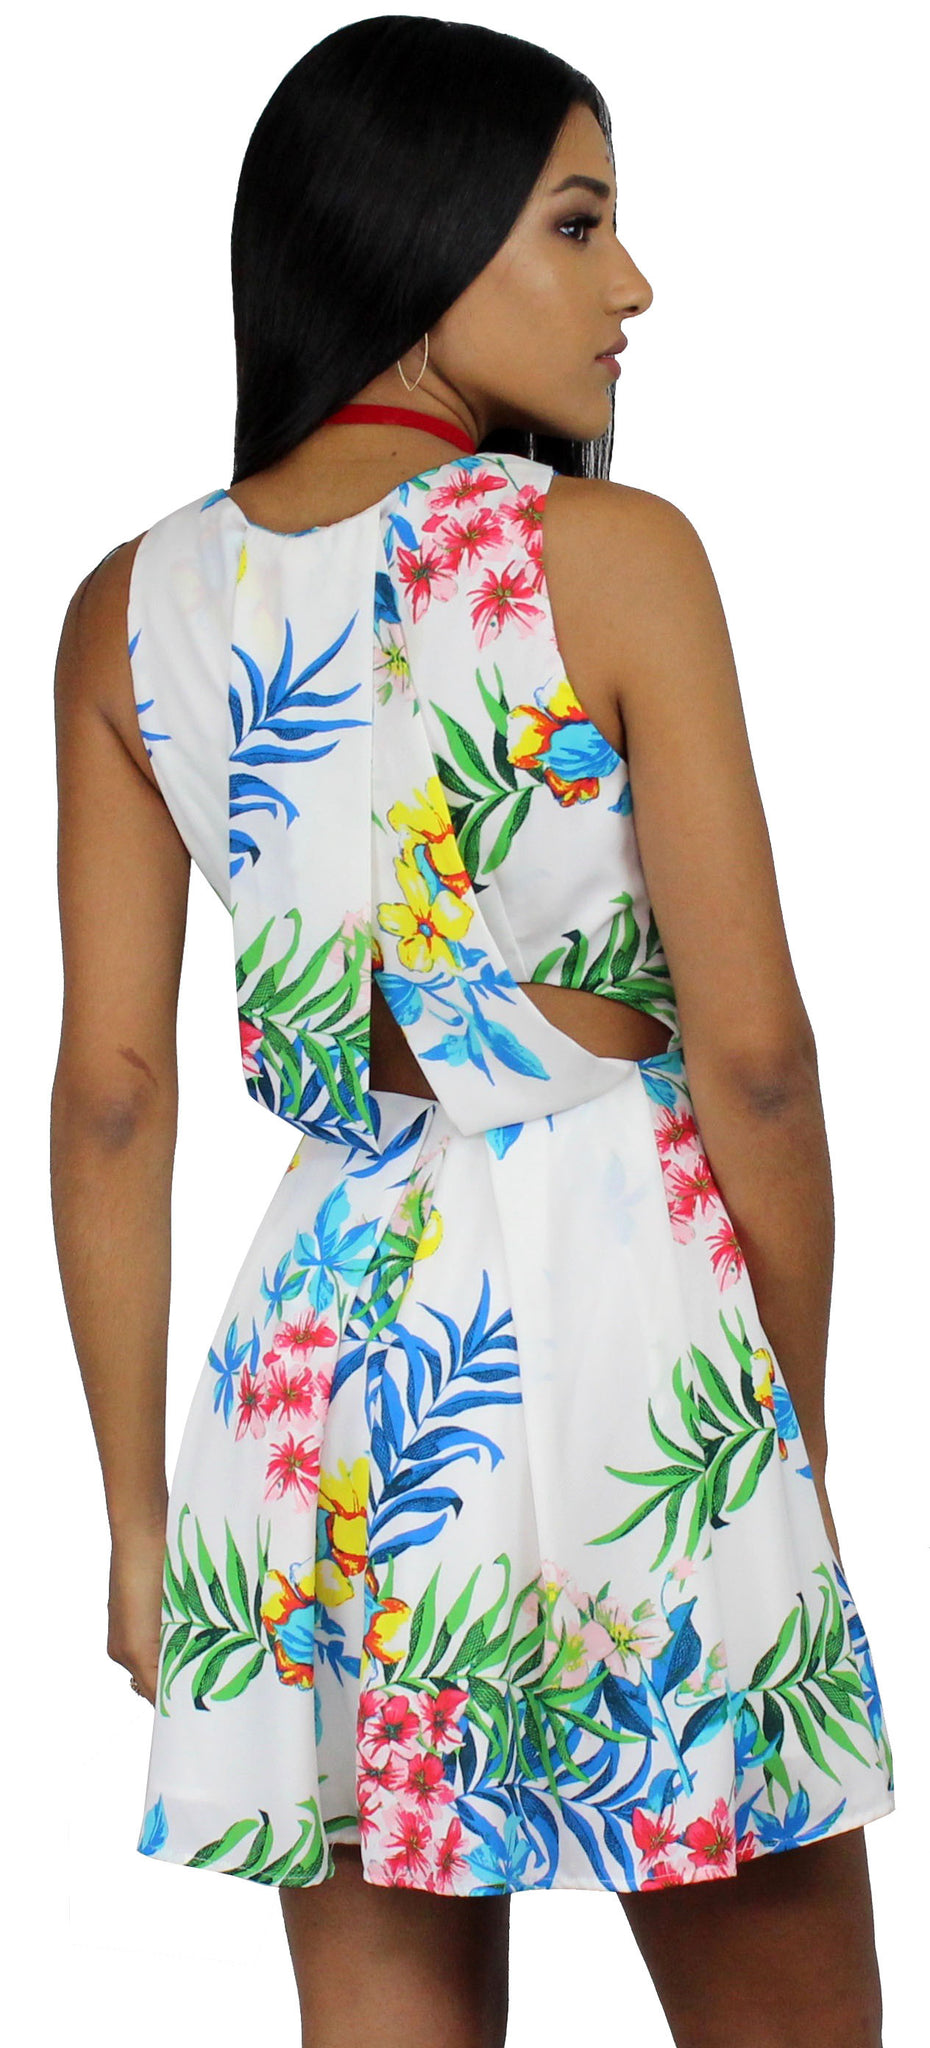 Undiscovered Island Floral Print Dress